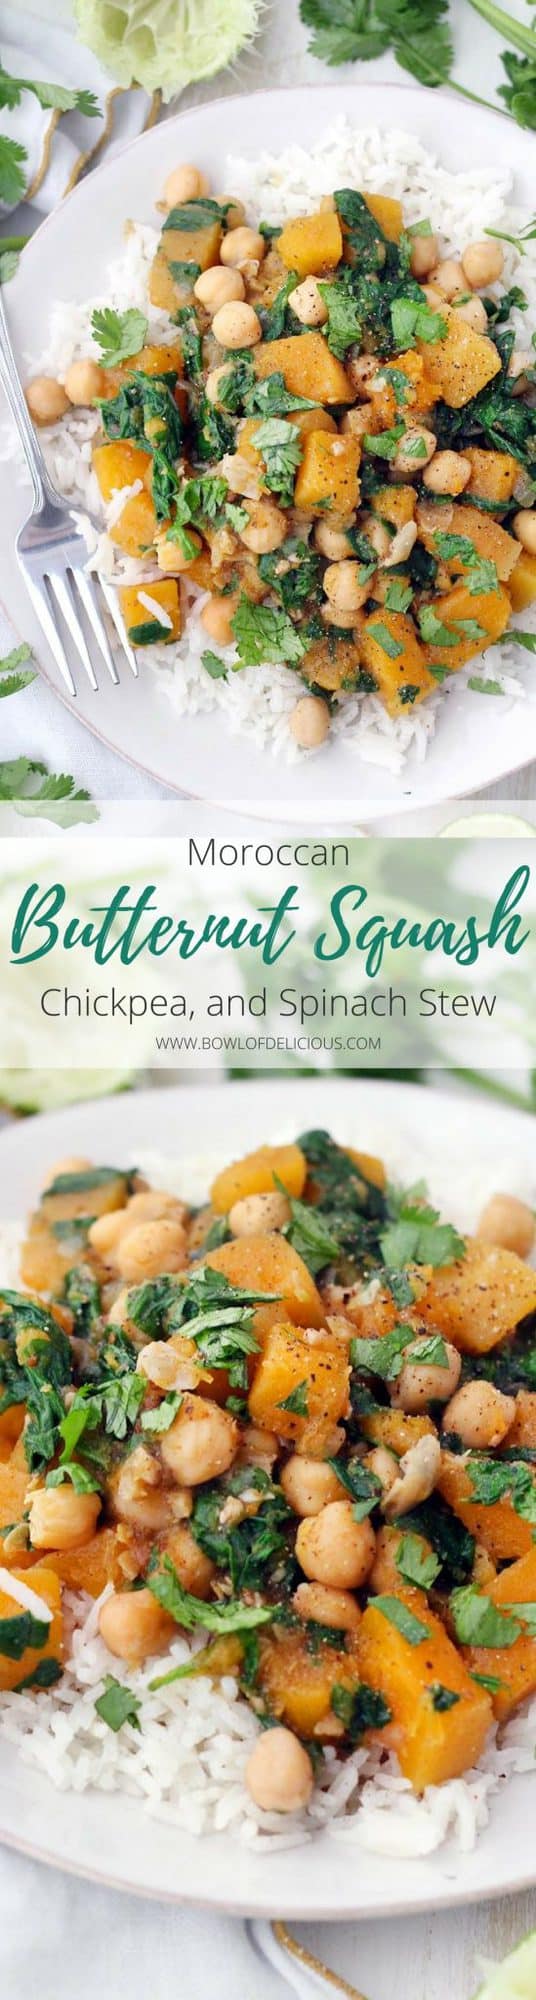 Moroccan Butternut Squash, Chickpea, and Spinach Stew | This spicy, healthy, vegan stew is packed full of butternut squash, chickpeas, spinach, and warm moroccan flavors. It's healthy, hearty, and gluten-free. Make in bulk and freeze the extra! #RasElHanout #VeganRecipes #ButternutSquash #Chickpeas #VeganStews #GlutenFree #GrainFree #DairyFree